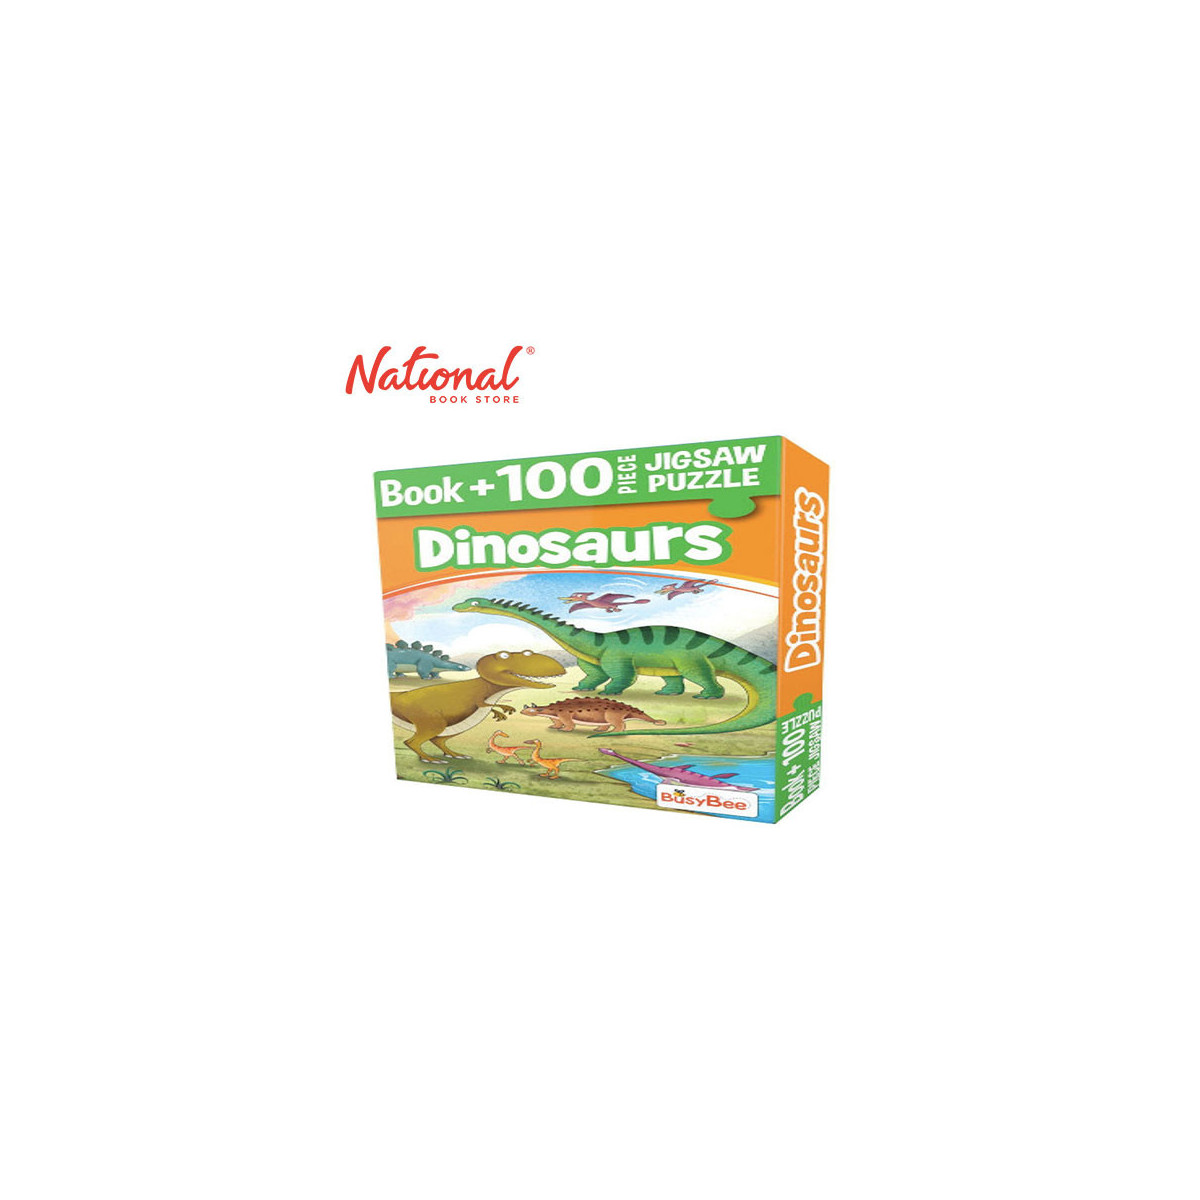 Dinosaur Book + 100 Pieces Jigsaw Puzzle - Hobbies for Kids